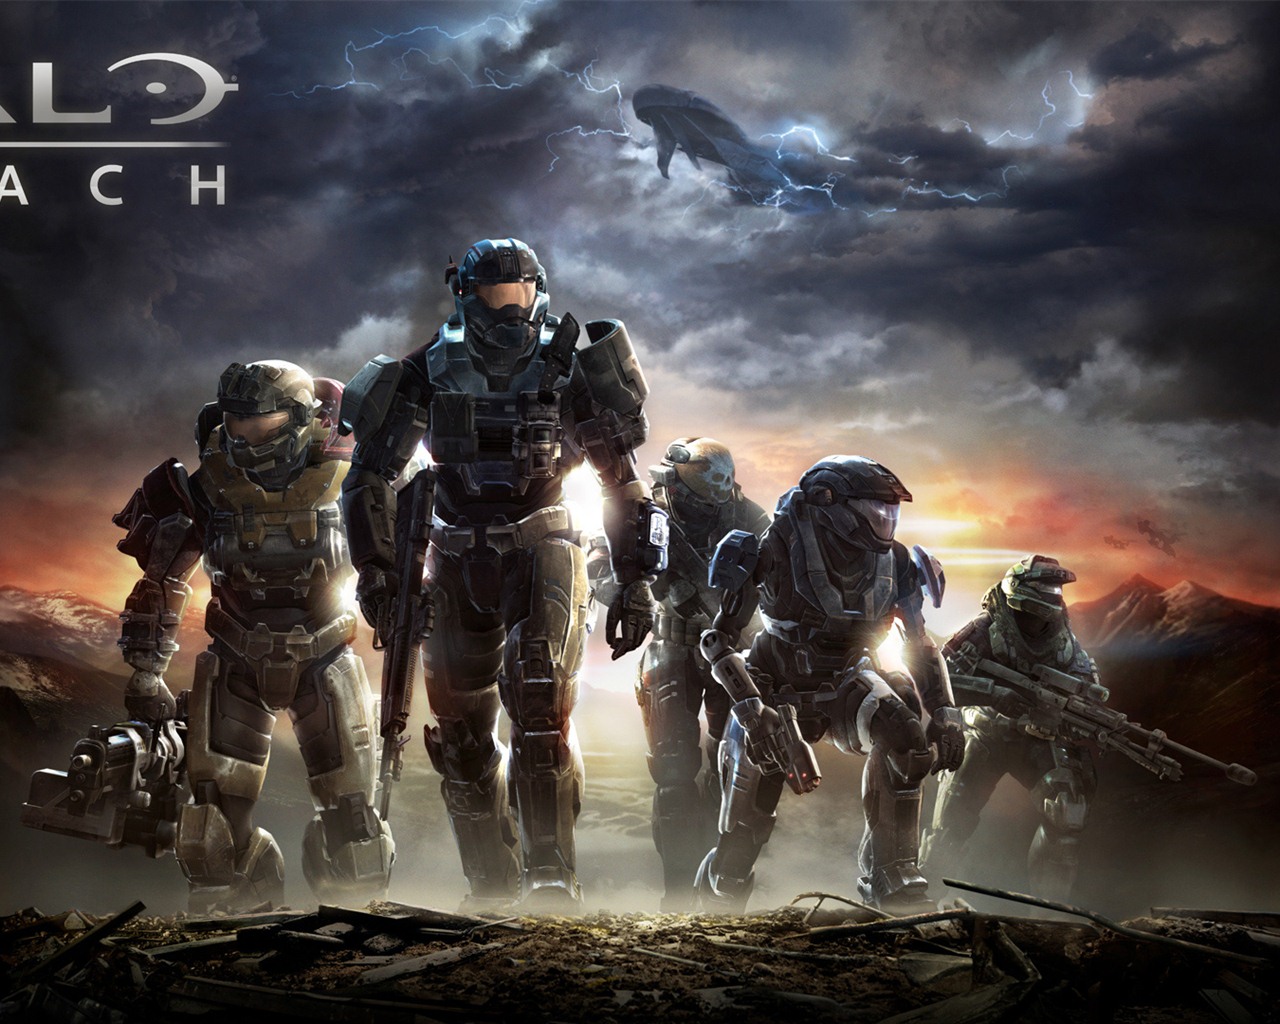 Halo Game HD Wallpapers #17 - 1280x1024